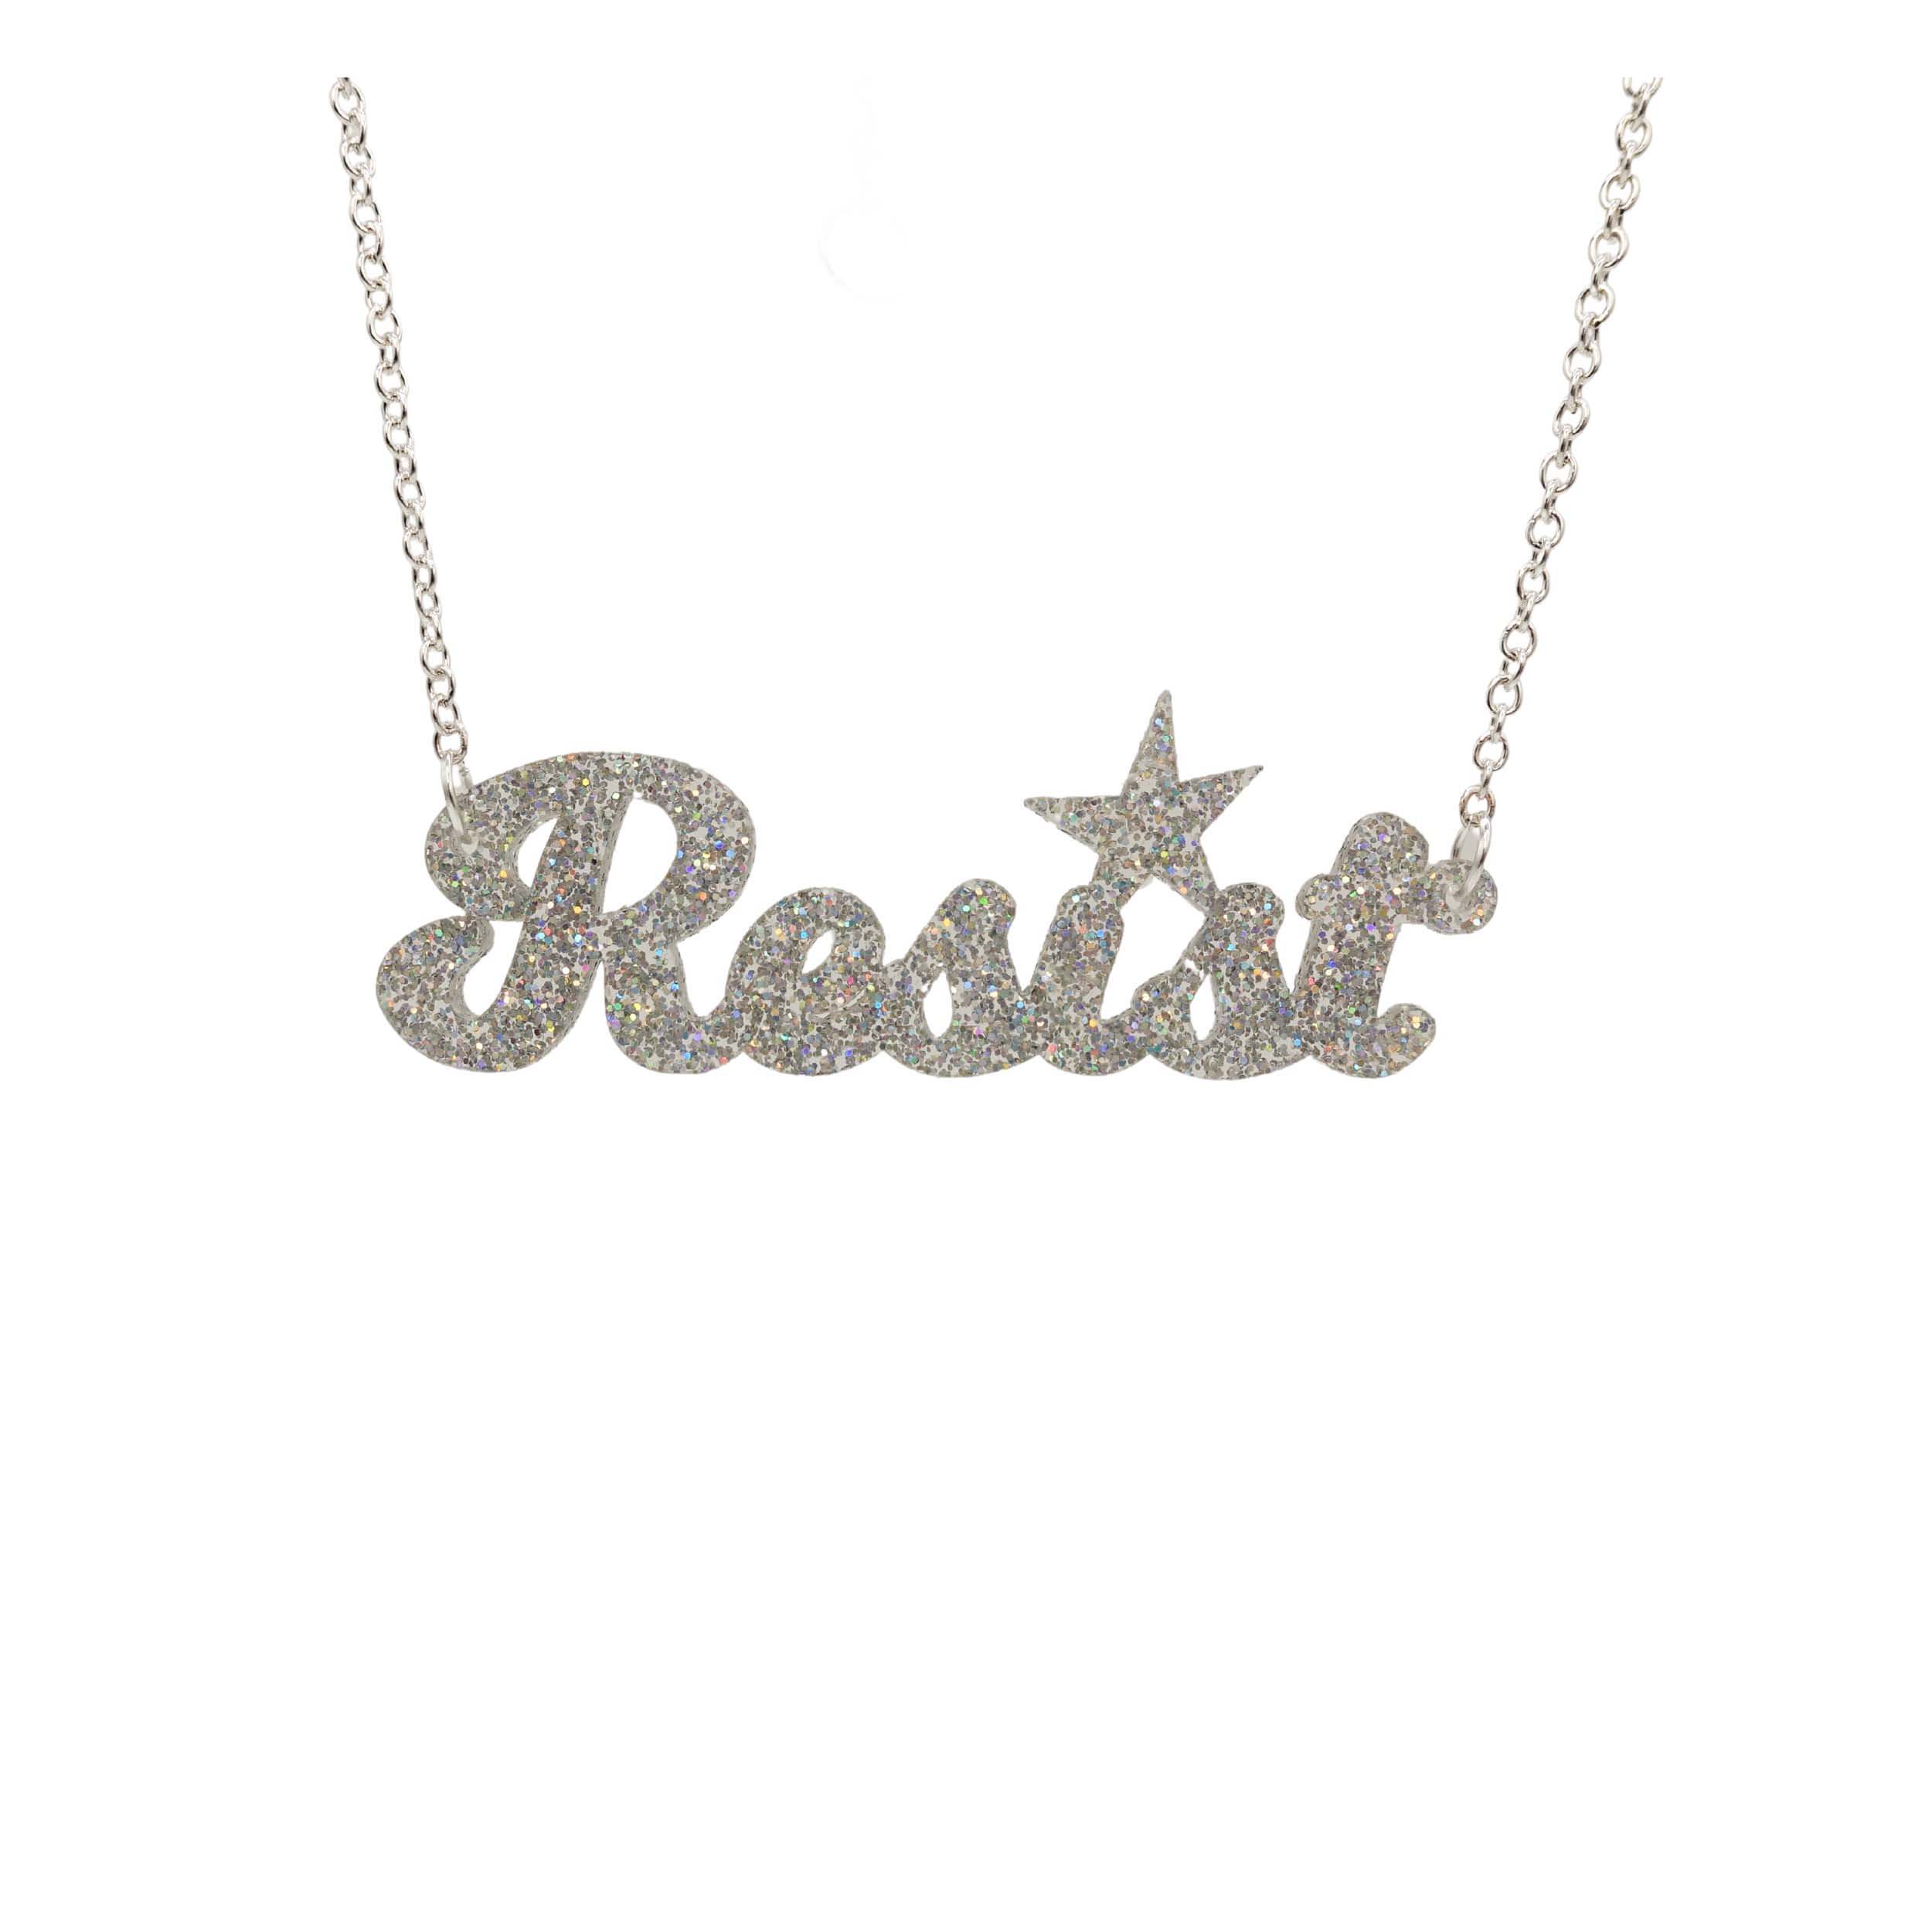 Silver glitter script Resist necklace shown hanging against a white background. 